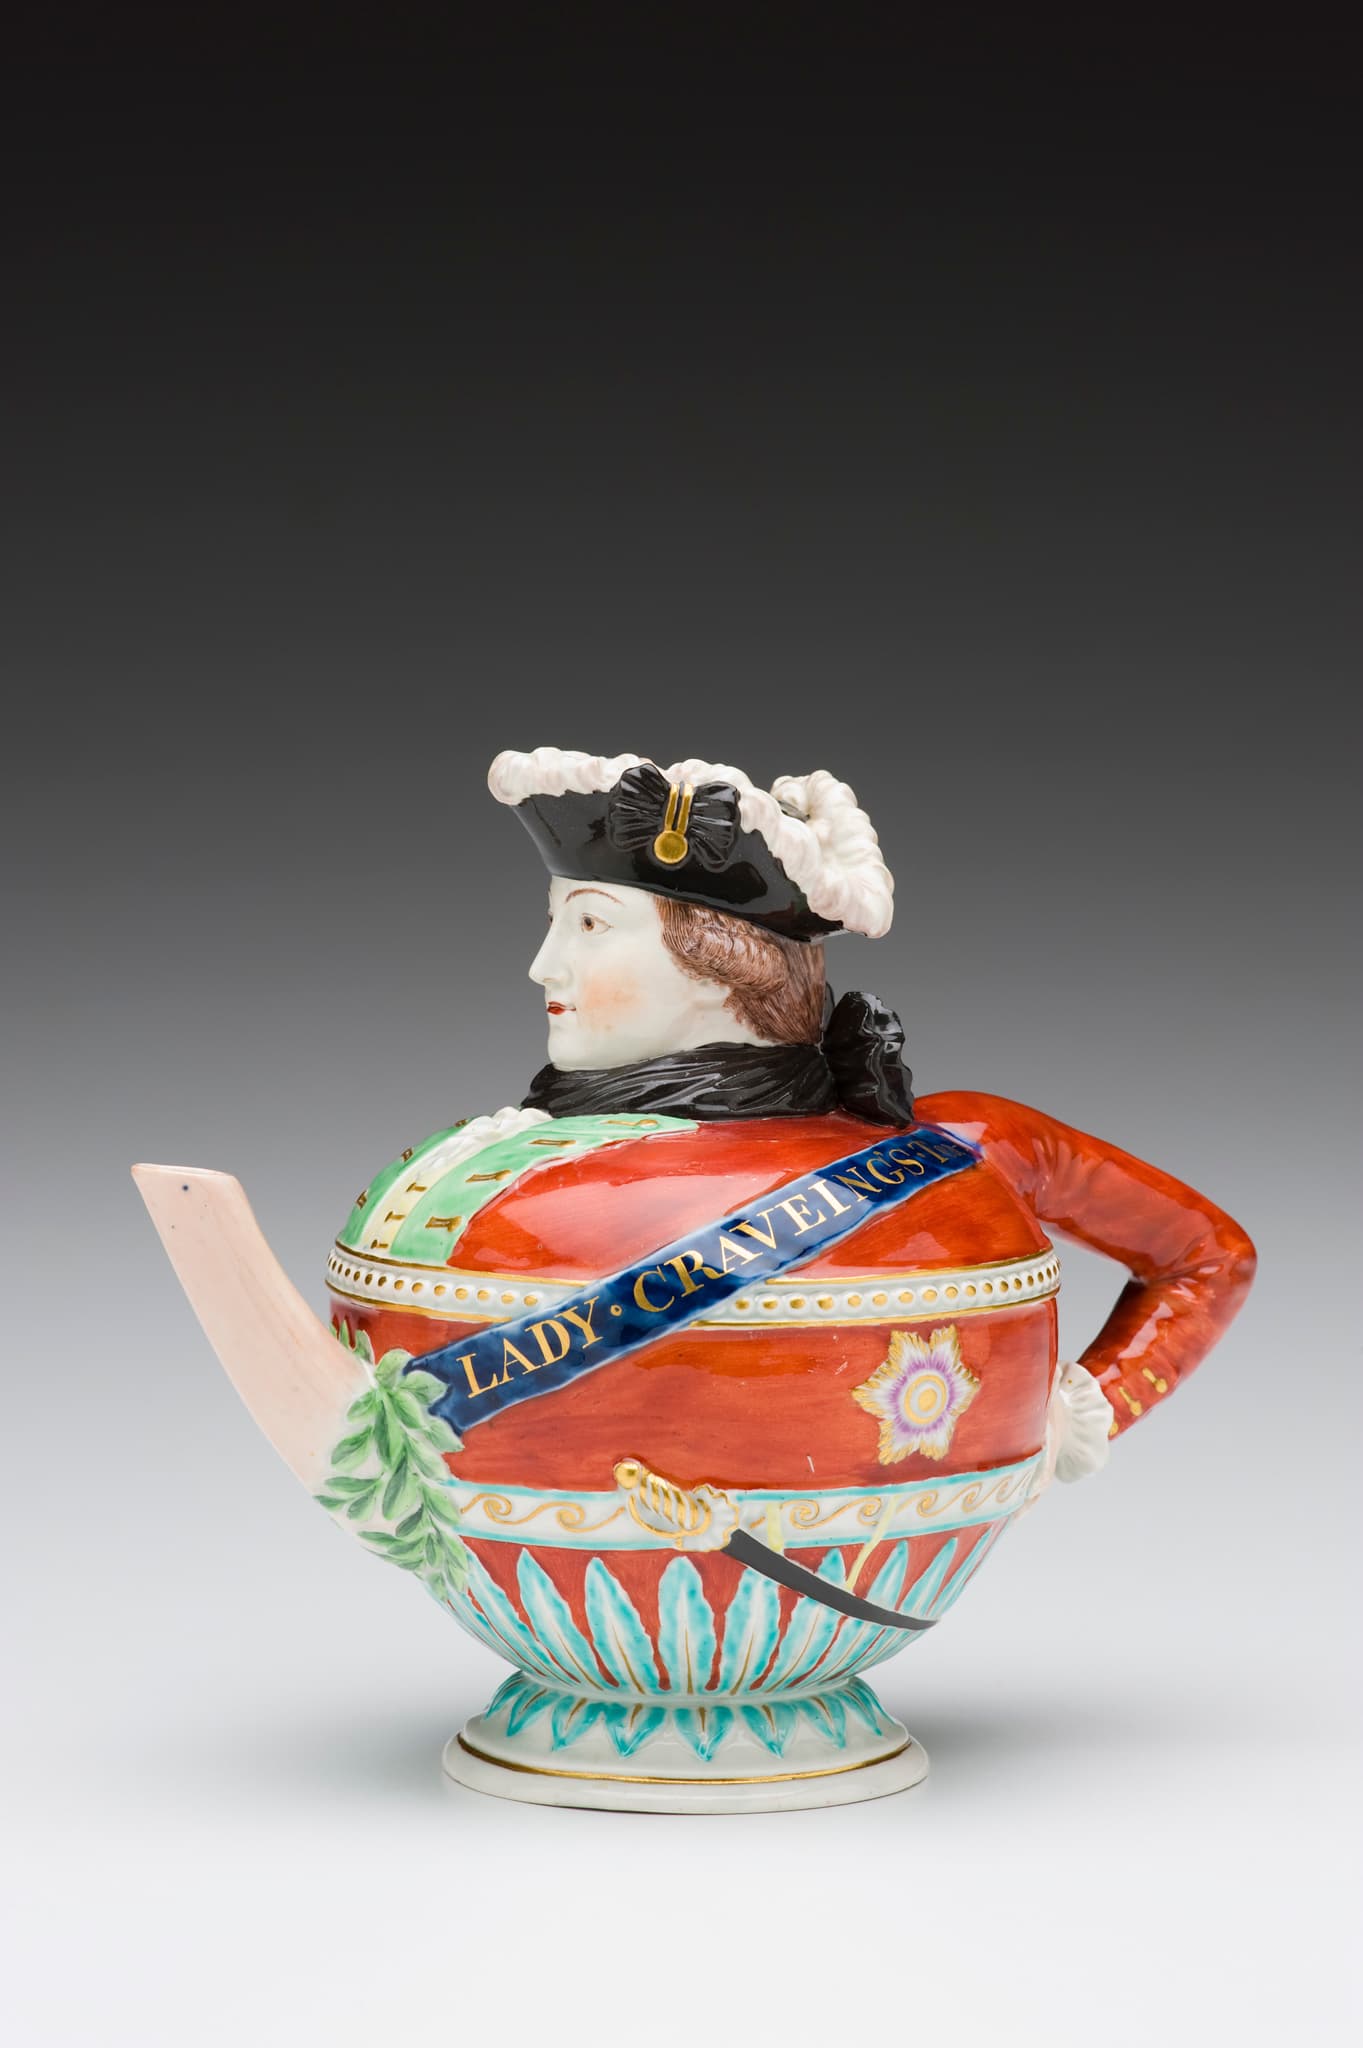 Derby Porcelain Factory, Lady Craveing's Teapot, Courtesy of the Kamm Teapot Collection, Craft in America